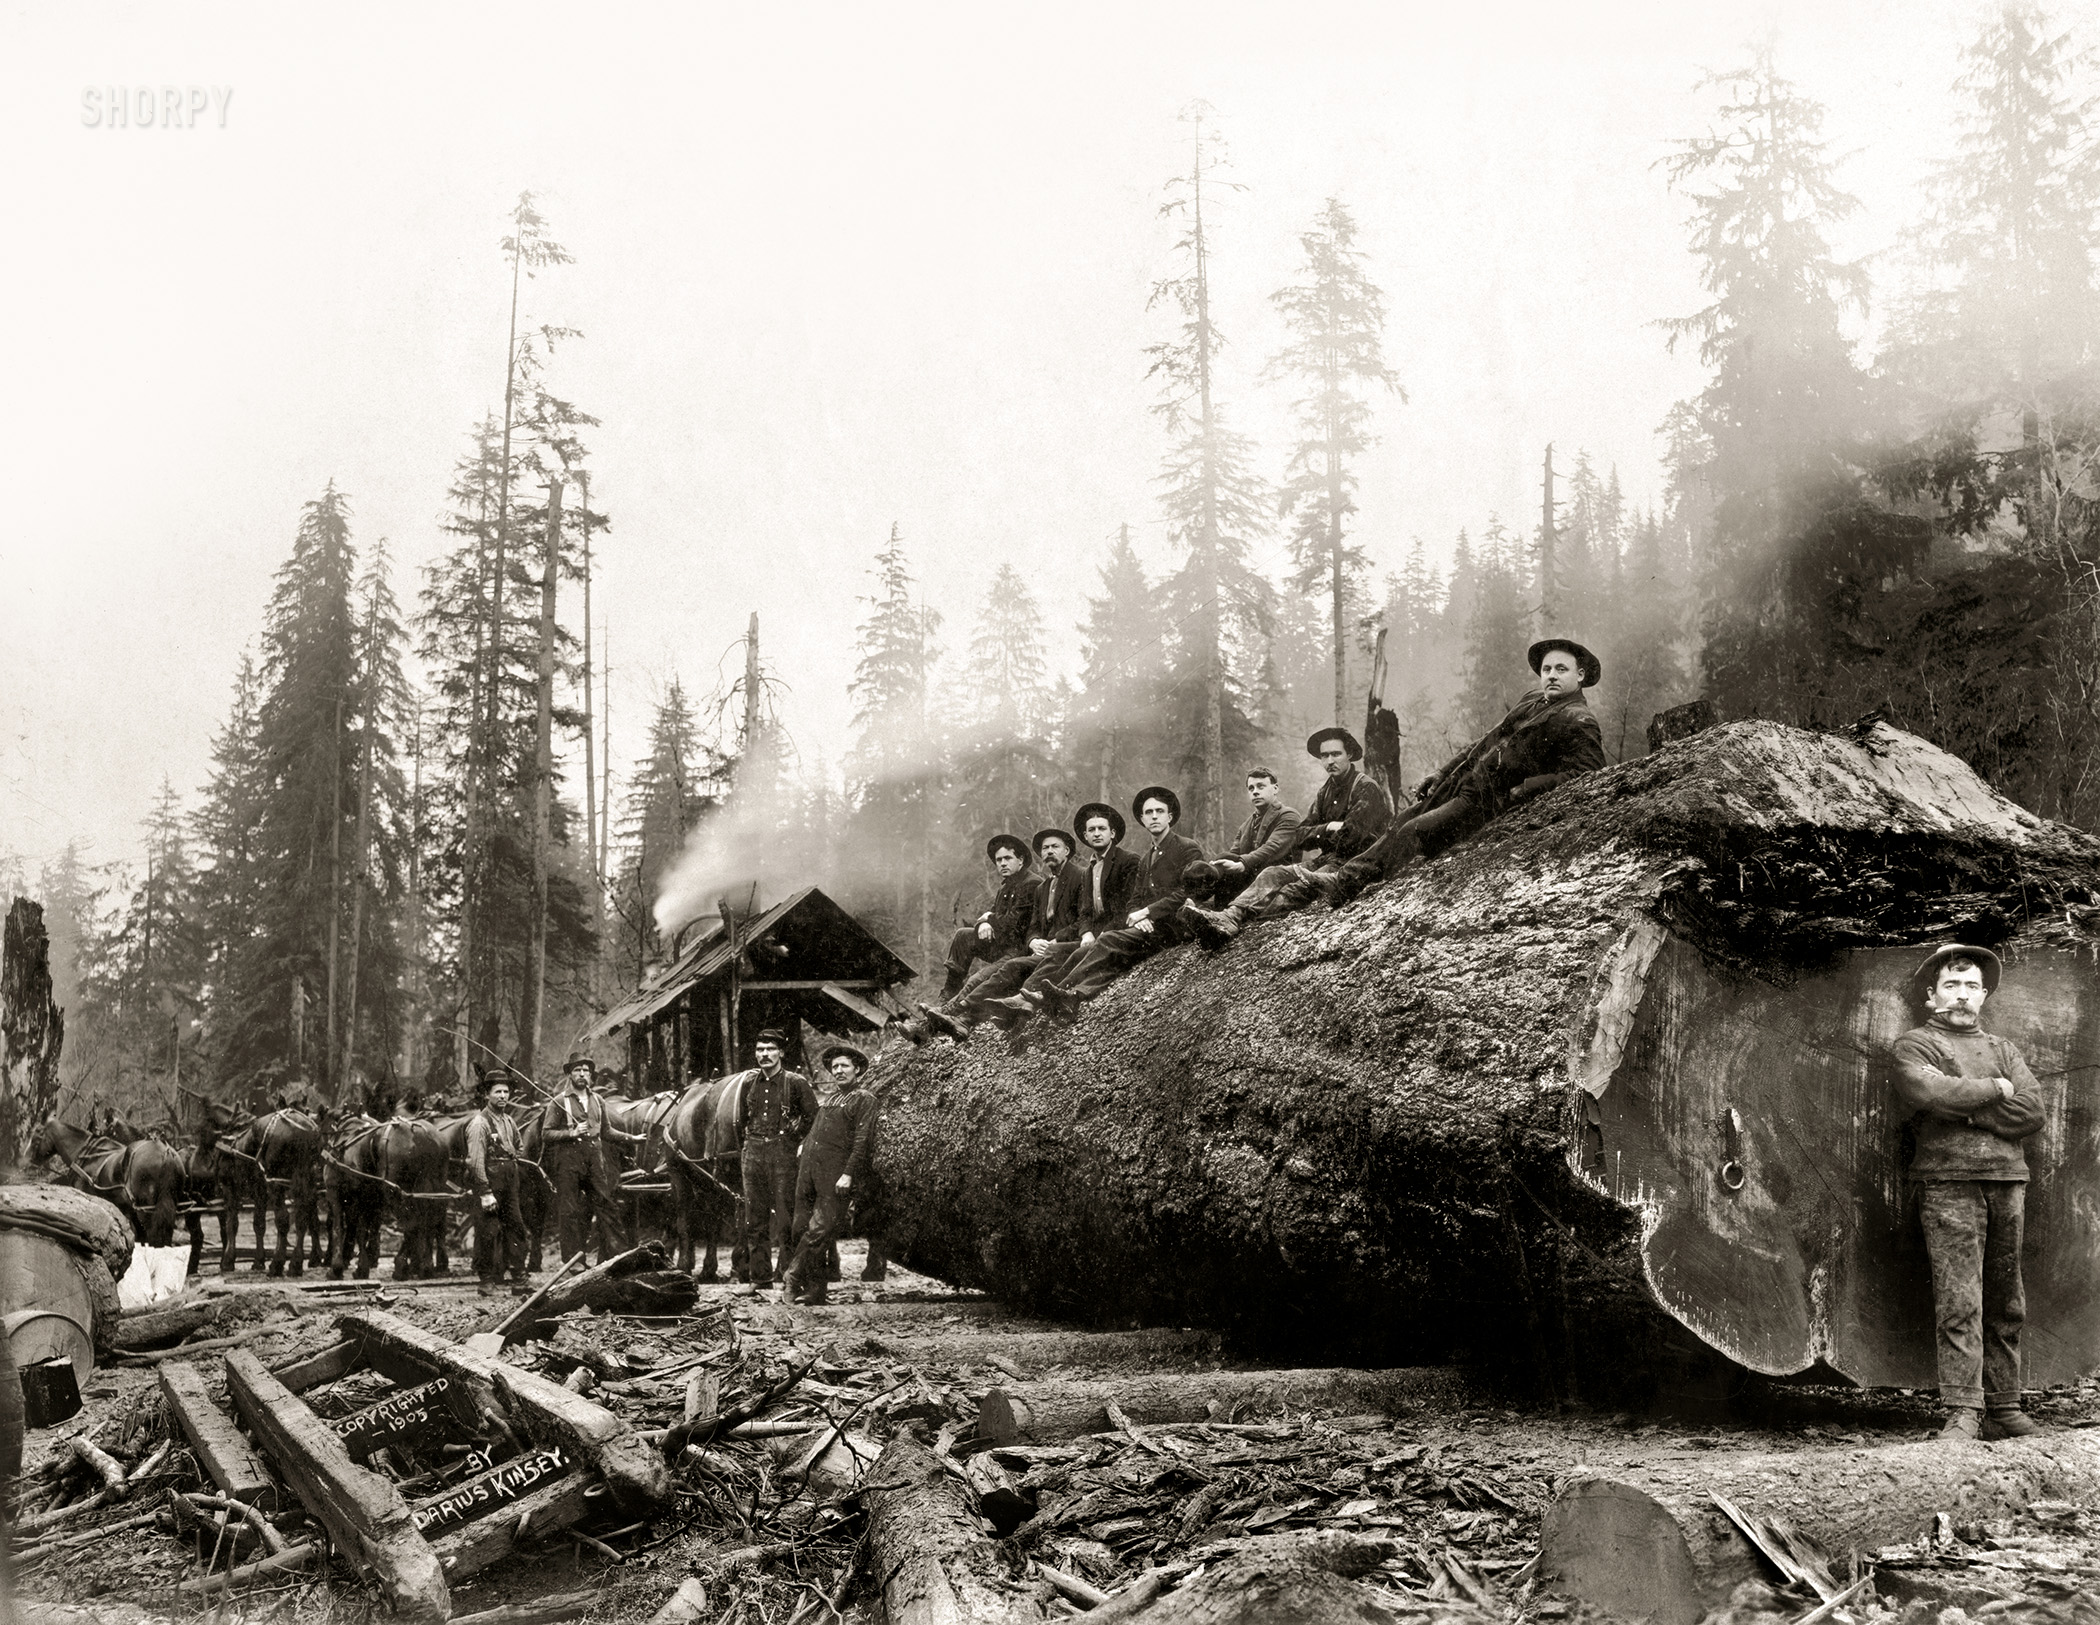 1905. "Men posing with team of horses hauling giant spruce log 30 feet in circumference. Cascade Mountains, Washington." Gelatin silver print by Darius Kinsey. View full size.